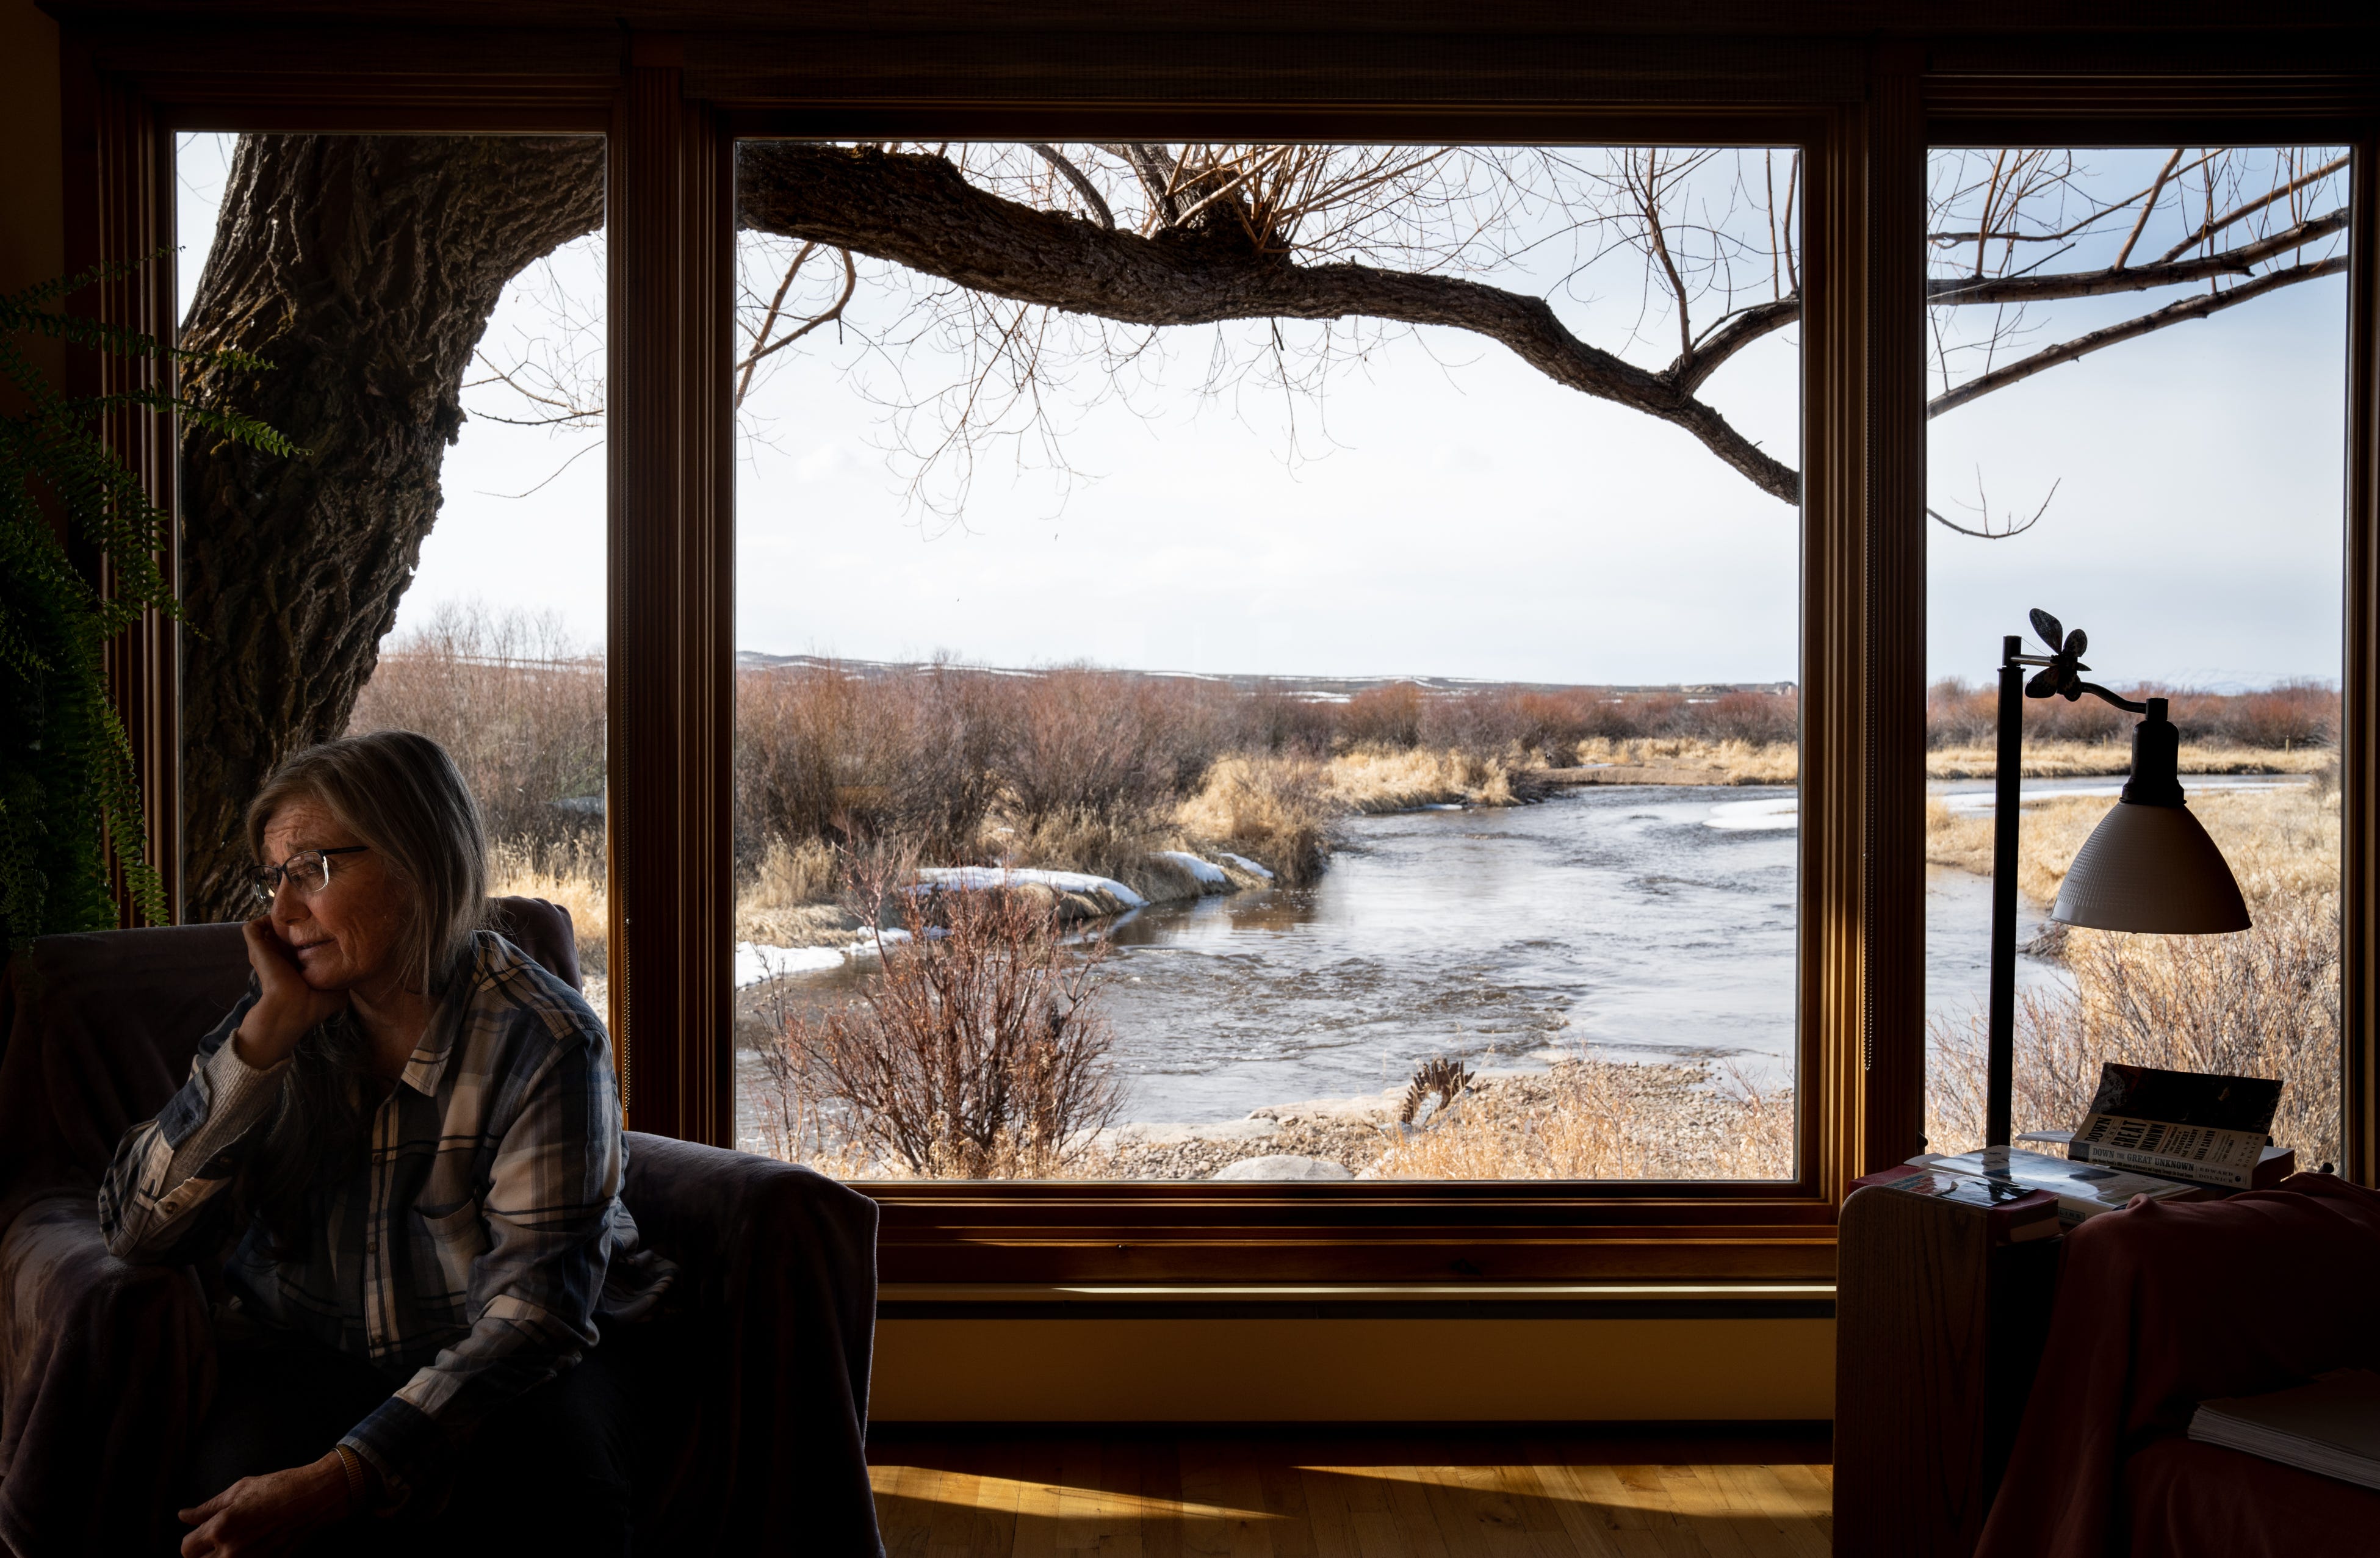 Leslie Hagenstein talks in her living room, which looks onto the New Fork River, in Pinedale, Wyoming, on March 25, 2022. Snow had receded from her lawn earlier than usual, threatening a costly repeat of the previous year’s irrigation reductions. “Last year was a real eye-opener,” she said.